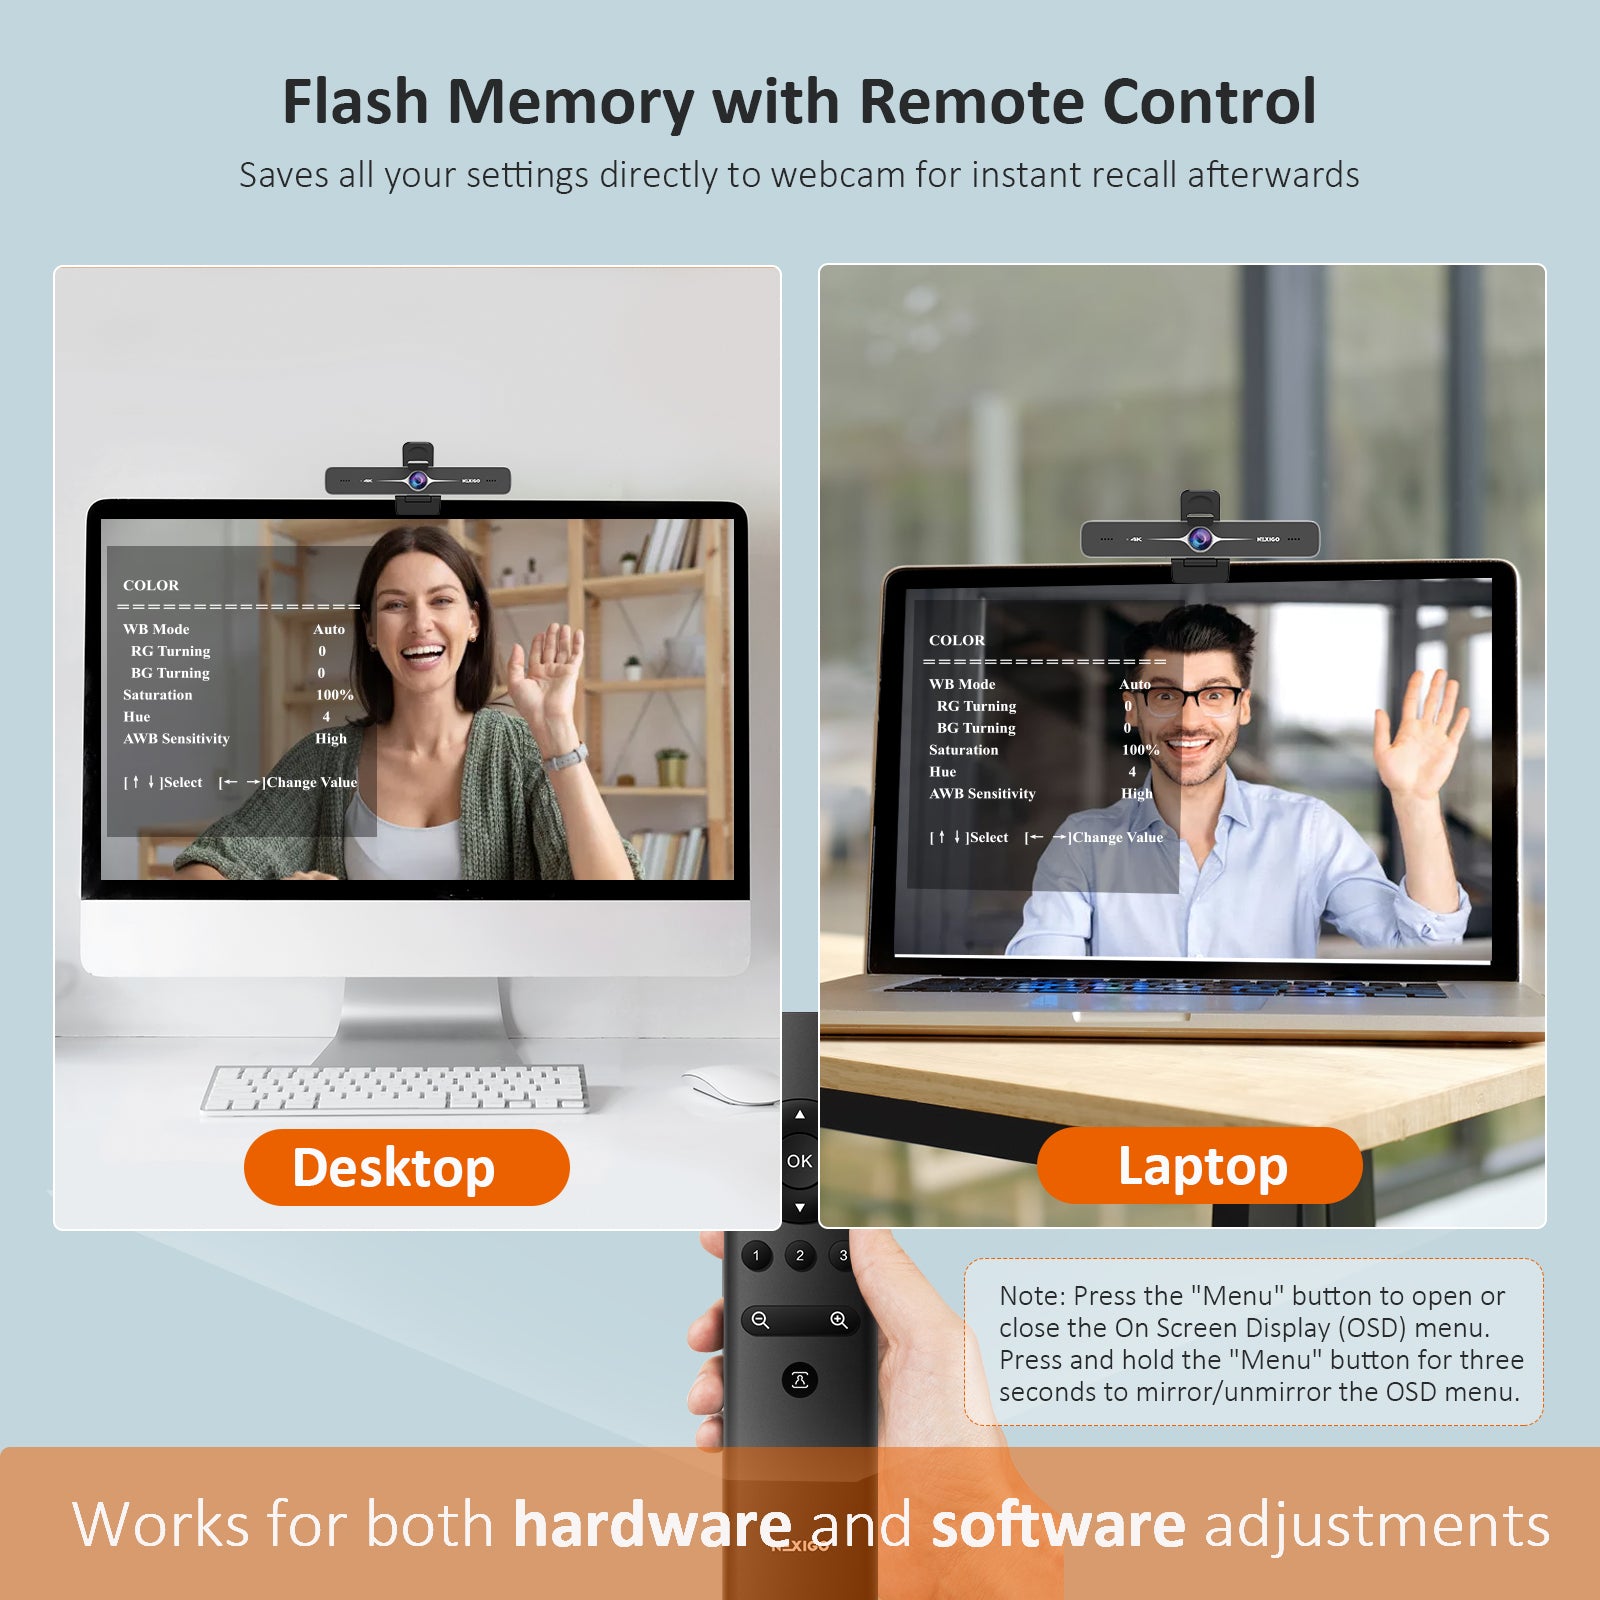 Webcam features OSD menu and Flash memory, which remembers previous adjustments.